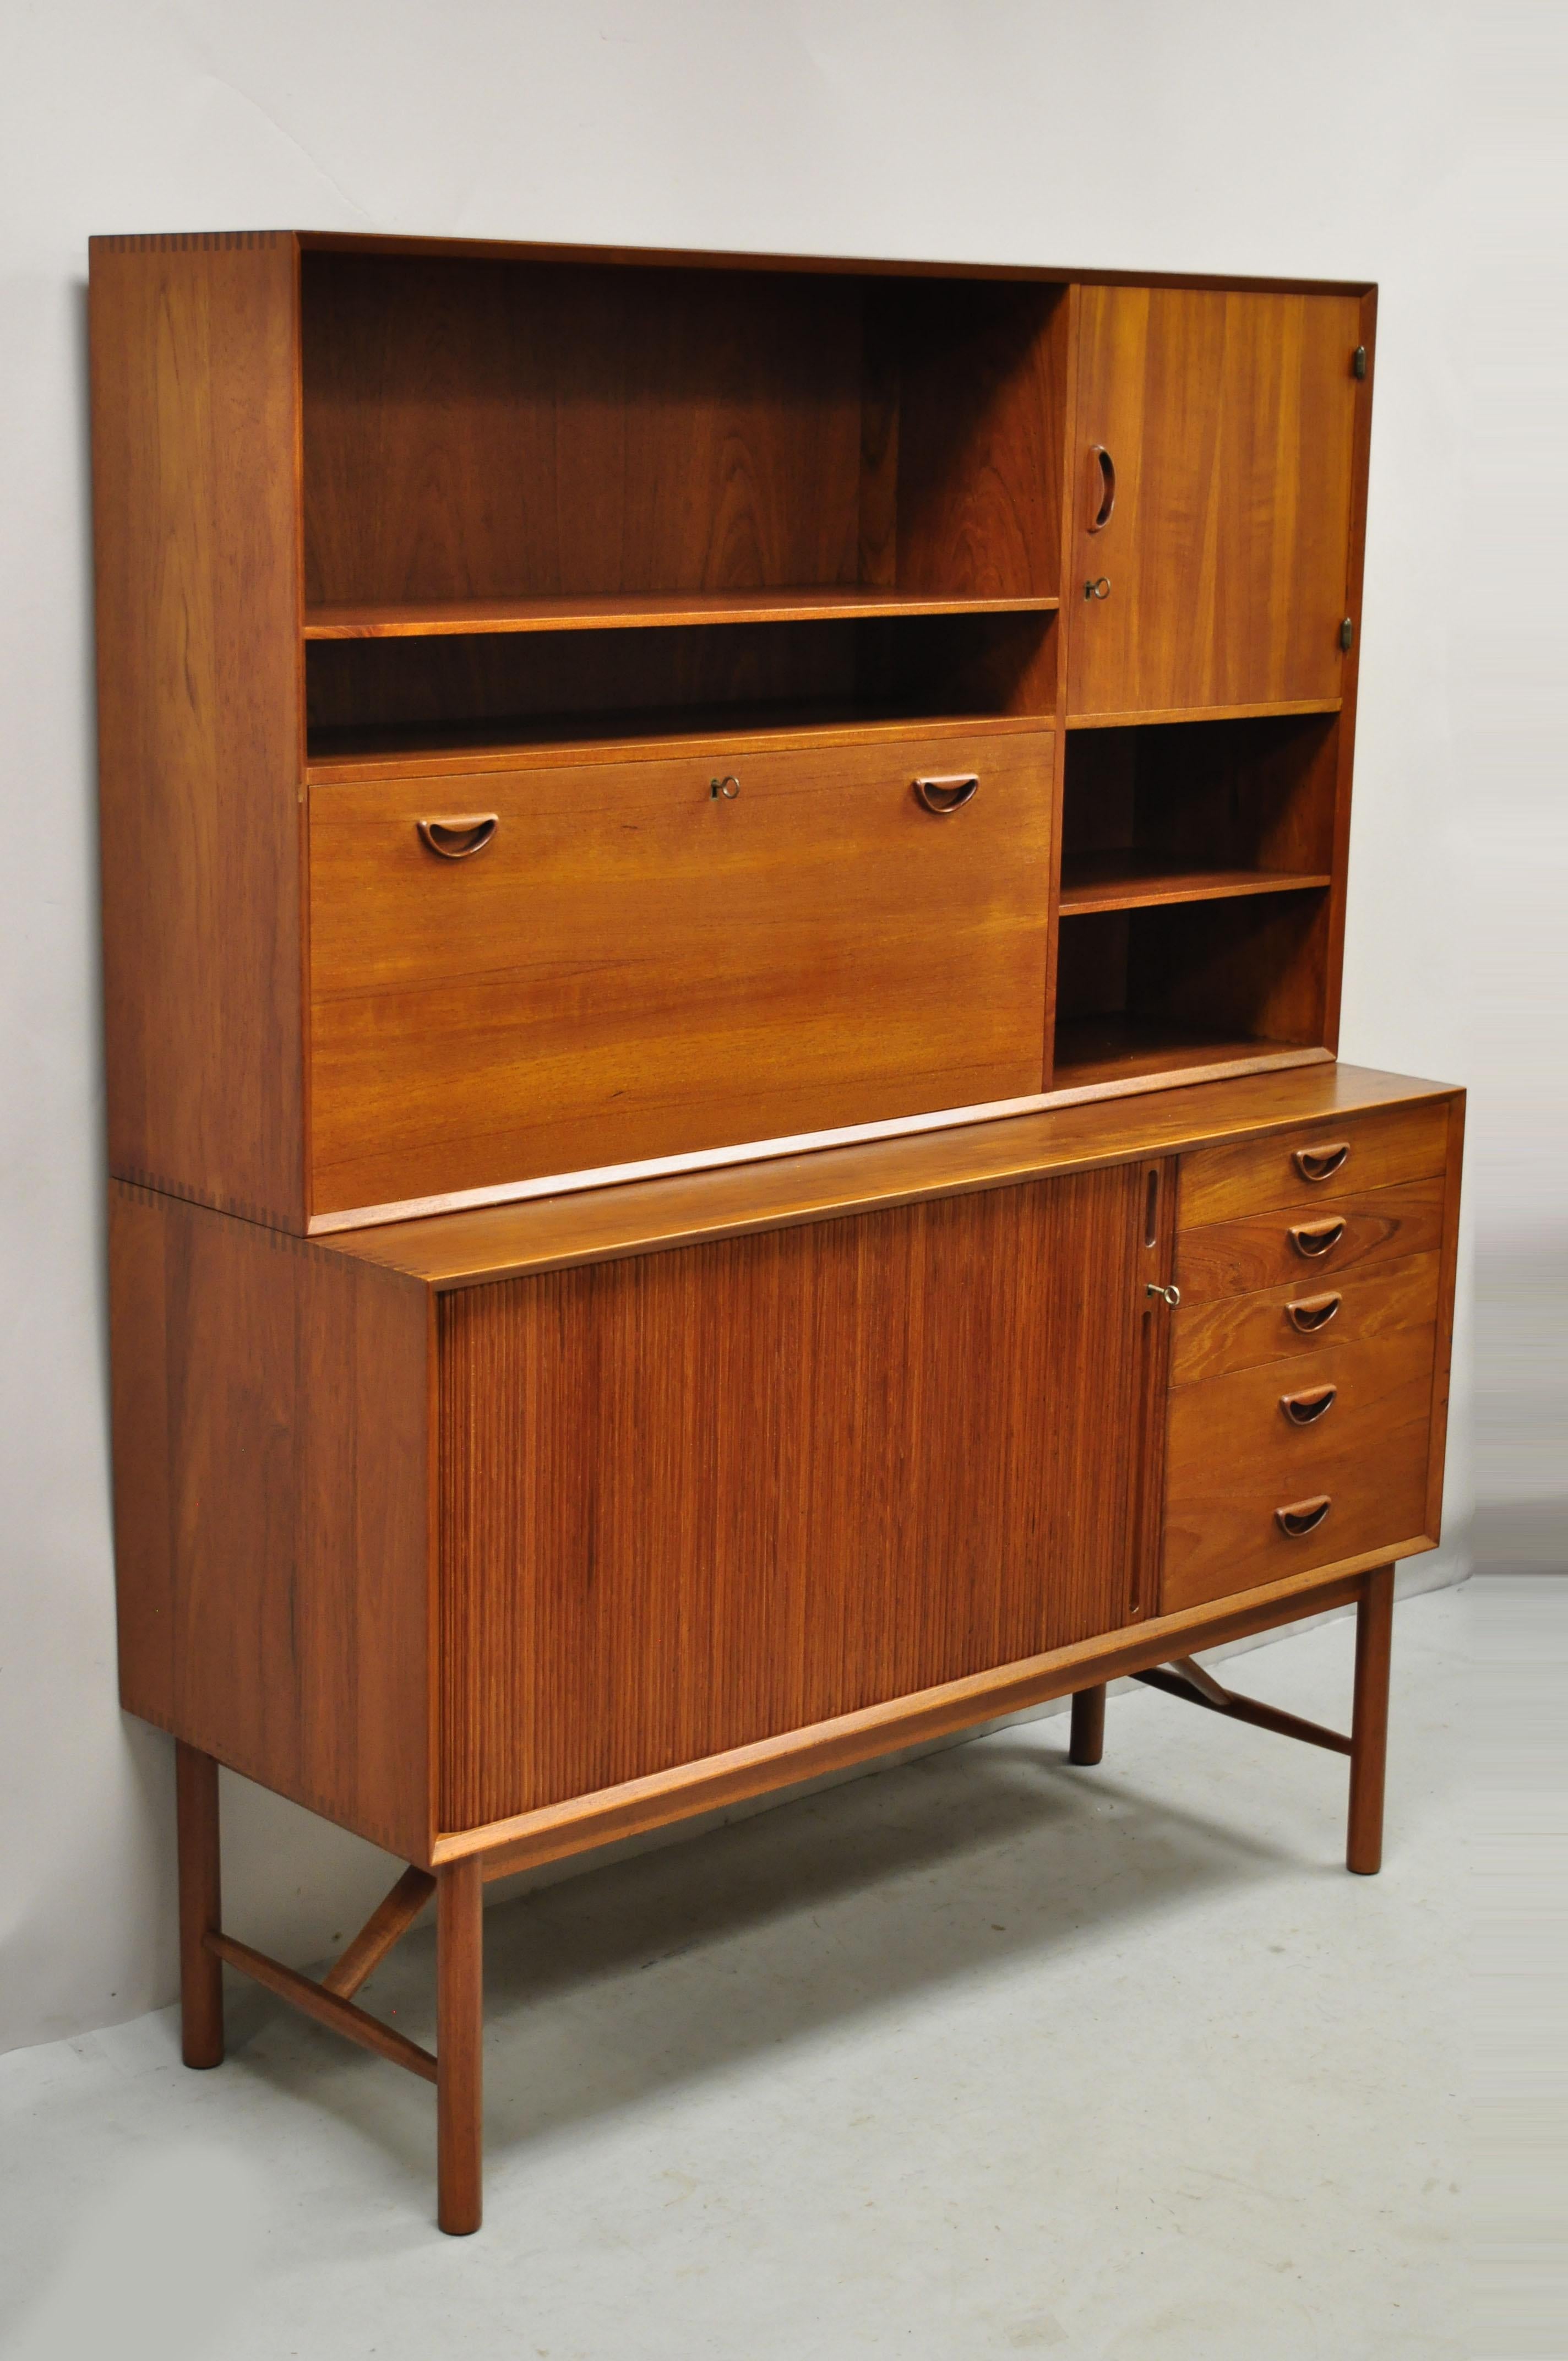 Peter Hvidt and Orla Molgaard Nielsen Teak Tambour Door Bookcase Hutch Credenza Cabinet. Item features tambour sliding door, unique raised stretcher base, exposed joinery to case, hutch top with fall front, 2 part construction, working lock and key,